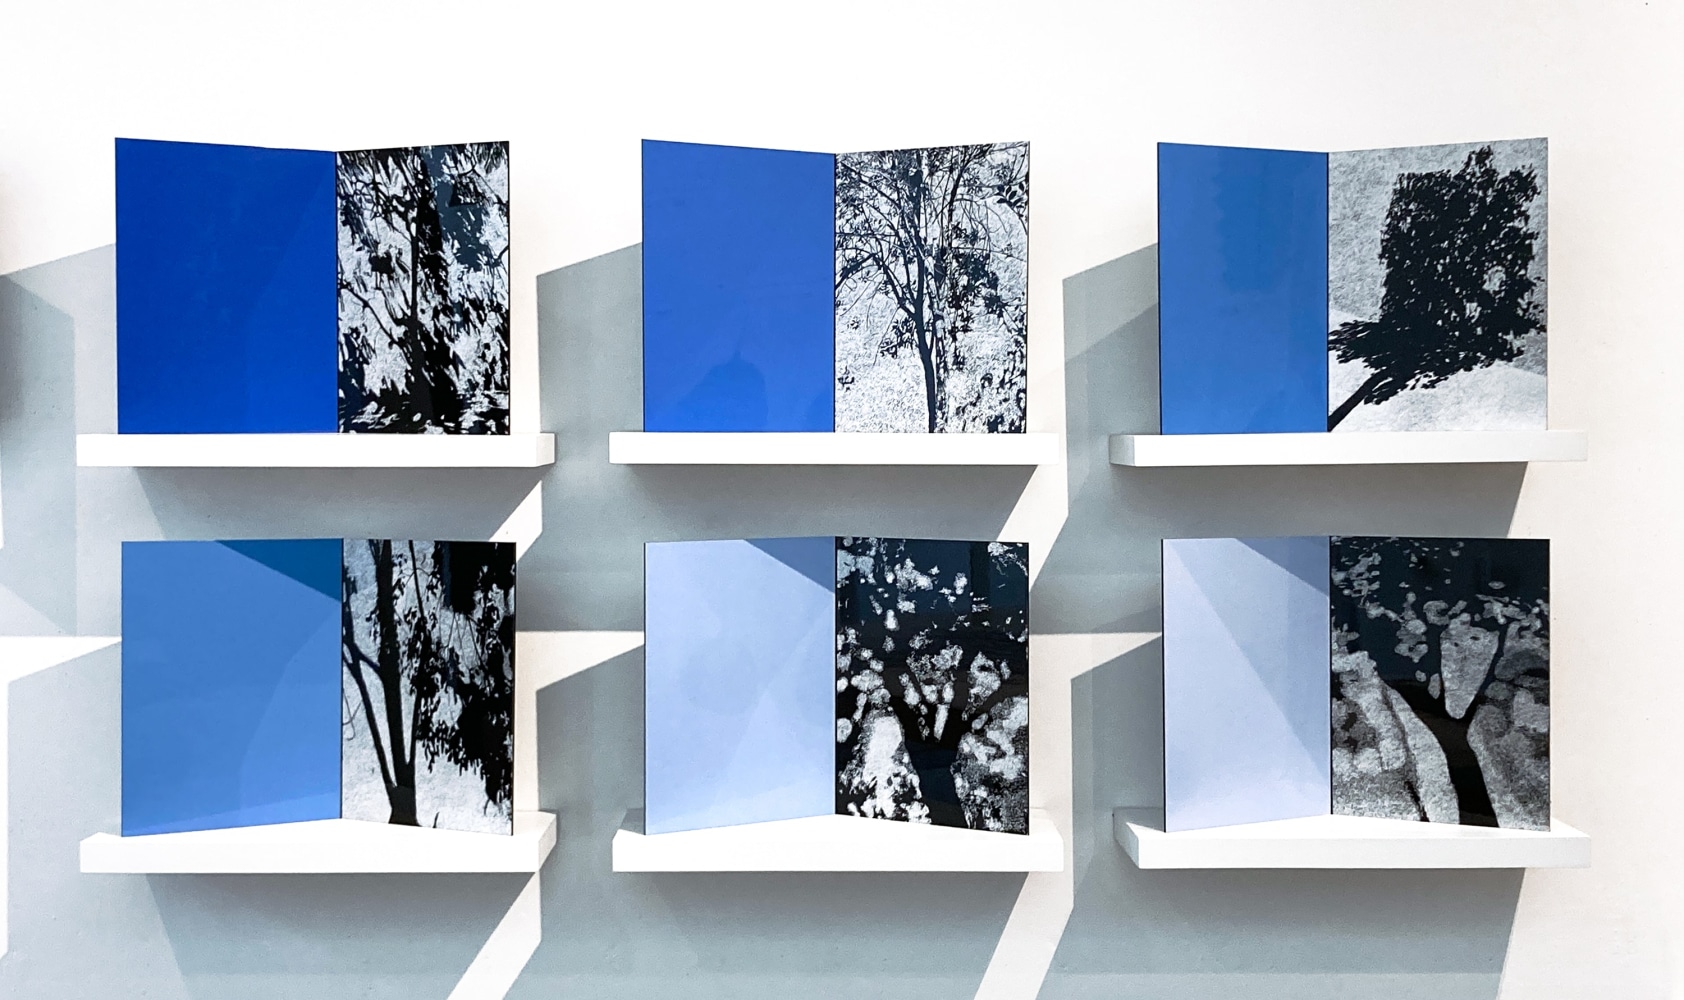 Blue Stories, I-VI
Jan Hendrix,&amp;nbsp;2021

Screen print and automotive
lacquer on aluminum panel
15.7&amp;quot; x 23.6&amp;quot; (&amp;nbsp;40 x 60 cm)
Edition of 12
$ 2200 each

Published by&amp;nbsp;An&amp;eacute;mona Editores

INQUIRE